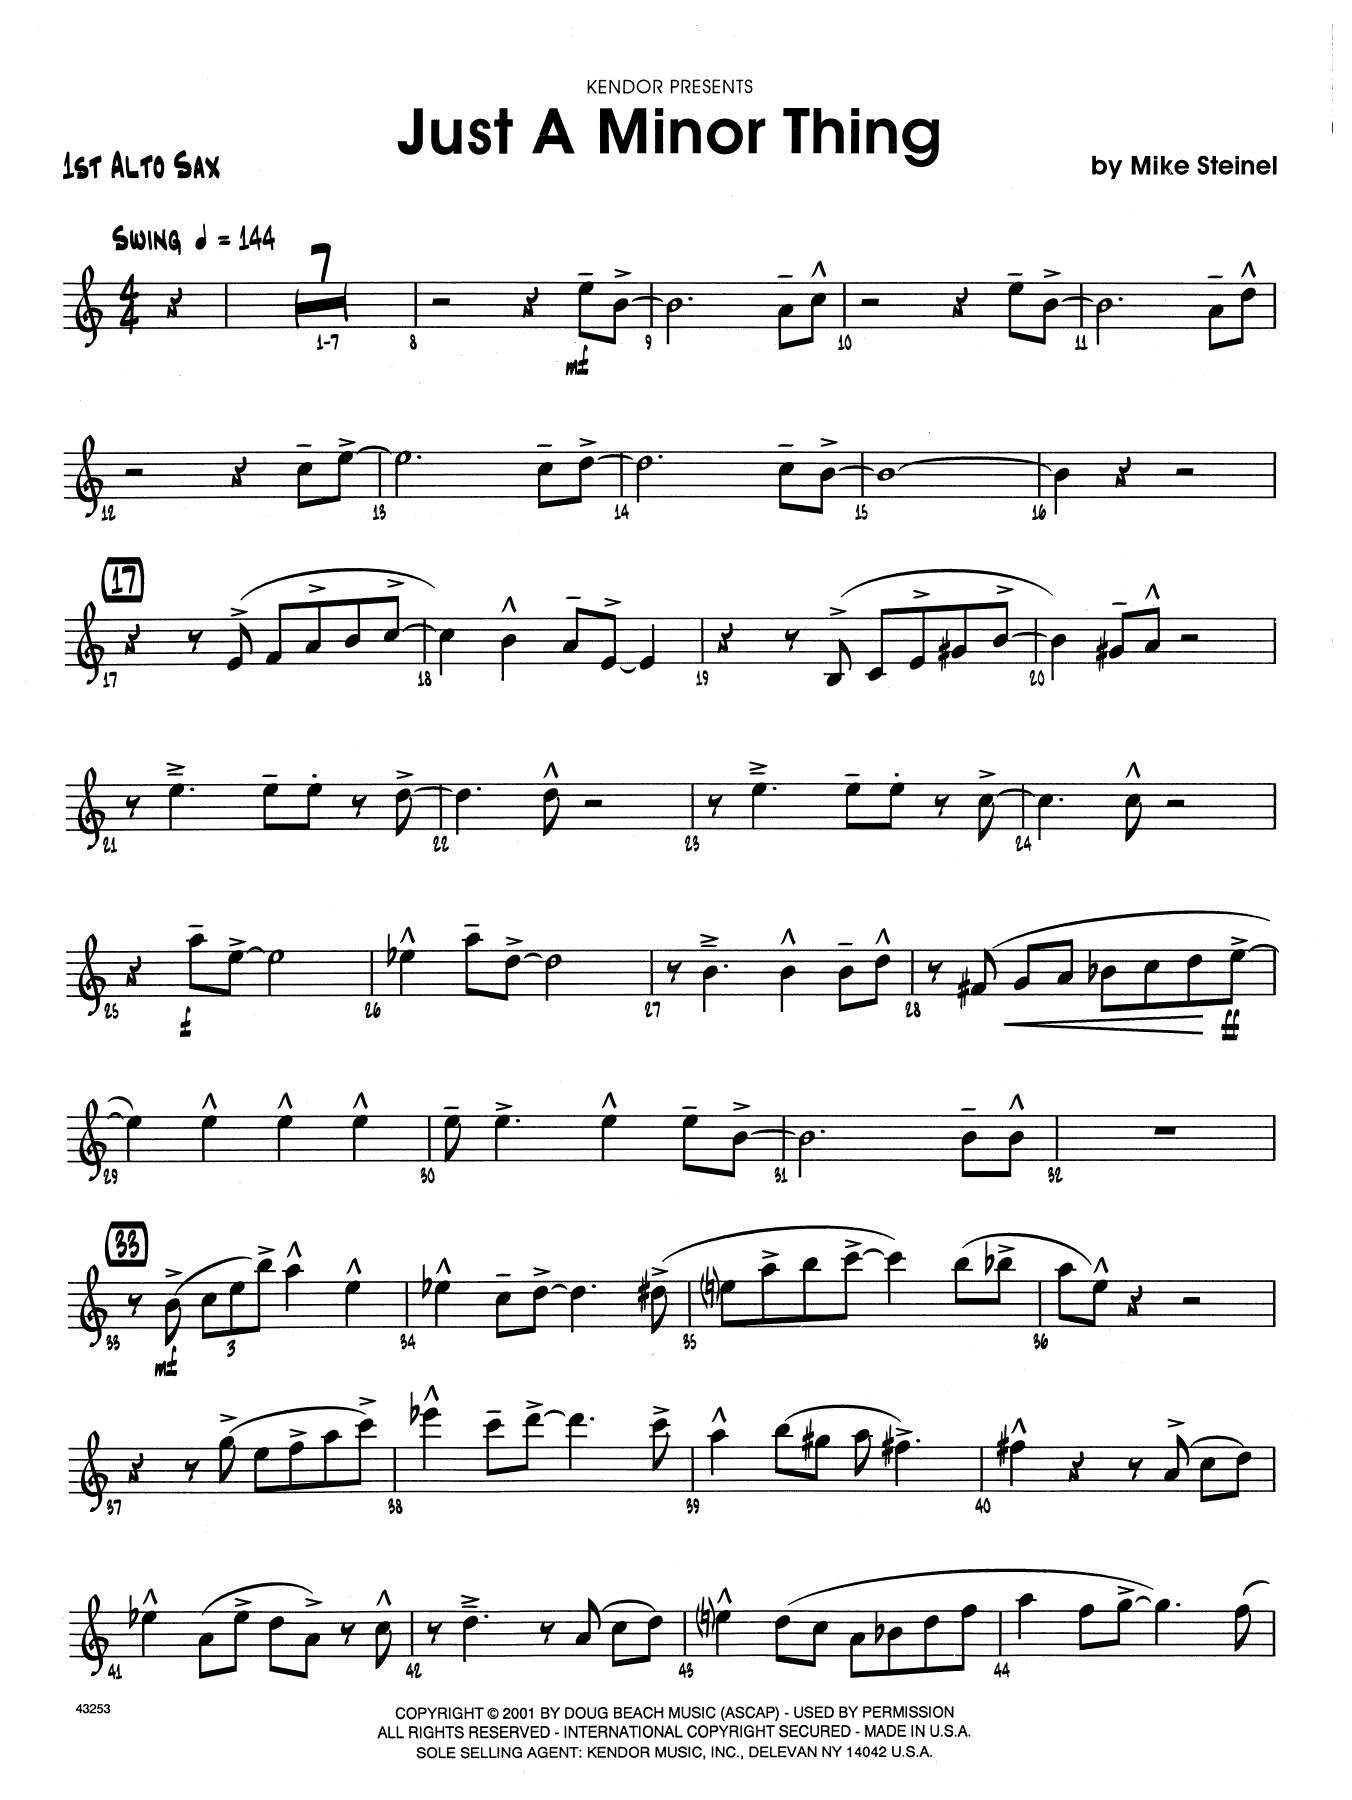 Download Mike Steinel Just A Minor Thing - Bass Clarinet 1 & Sheet Music